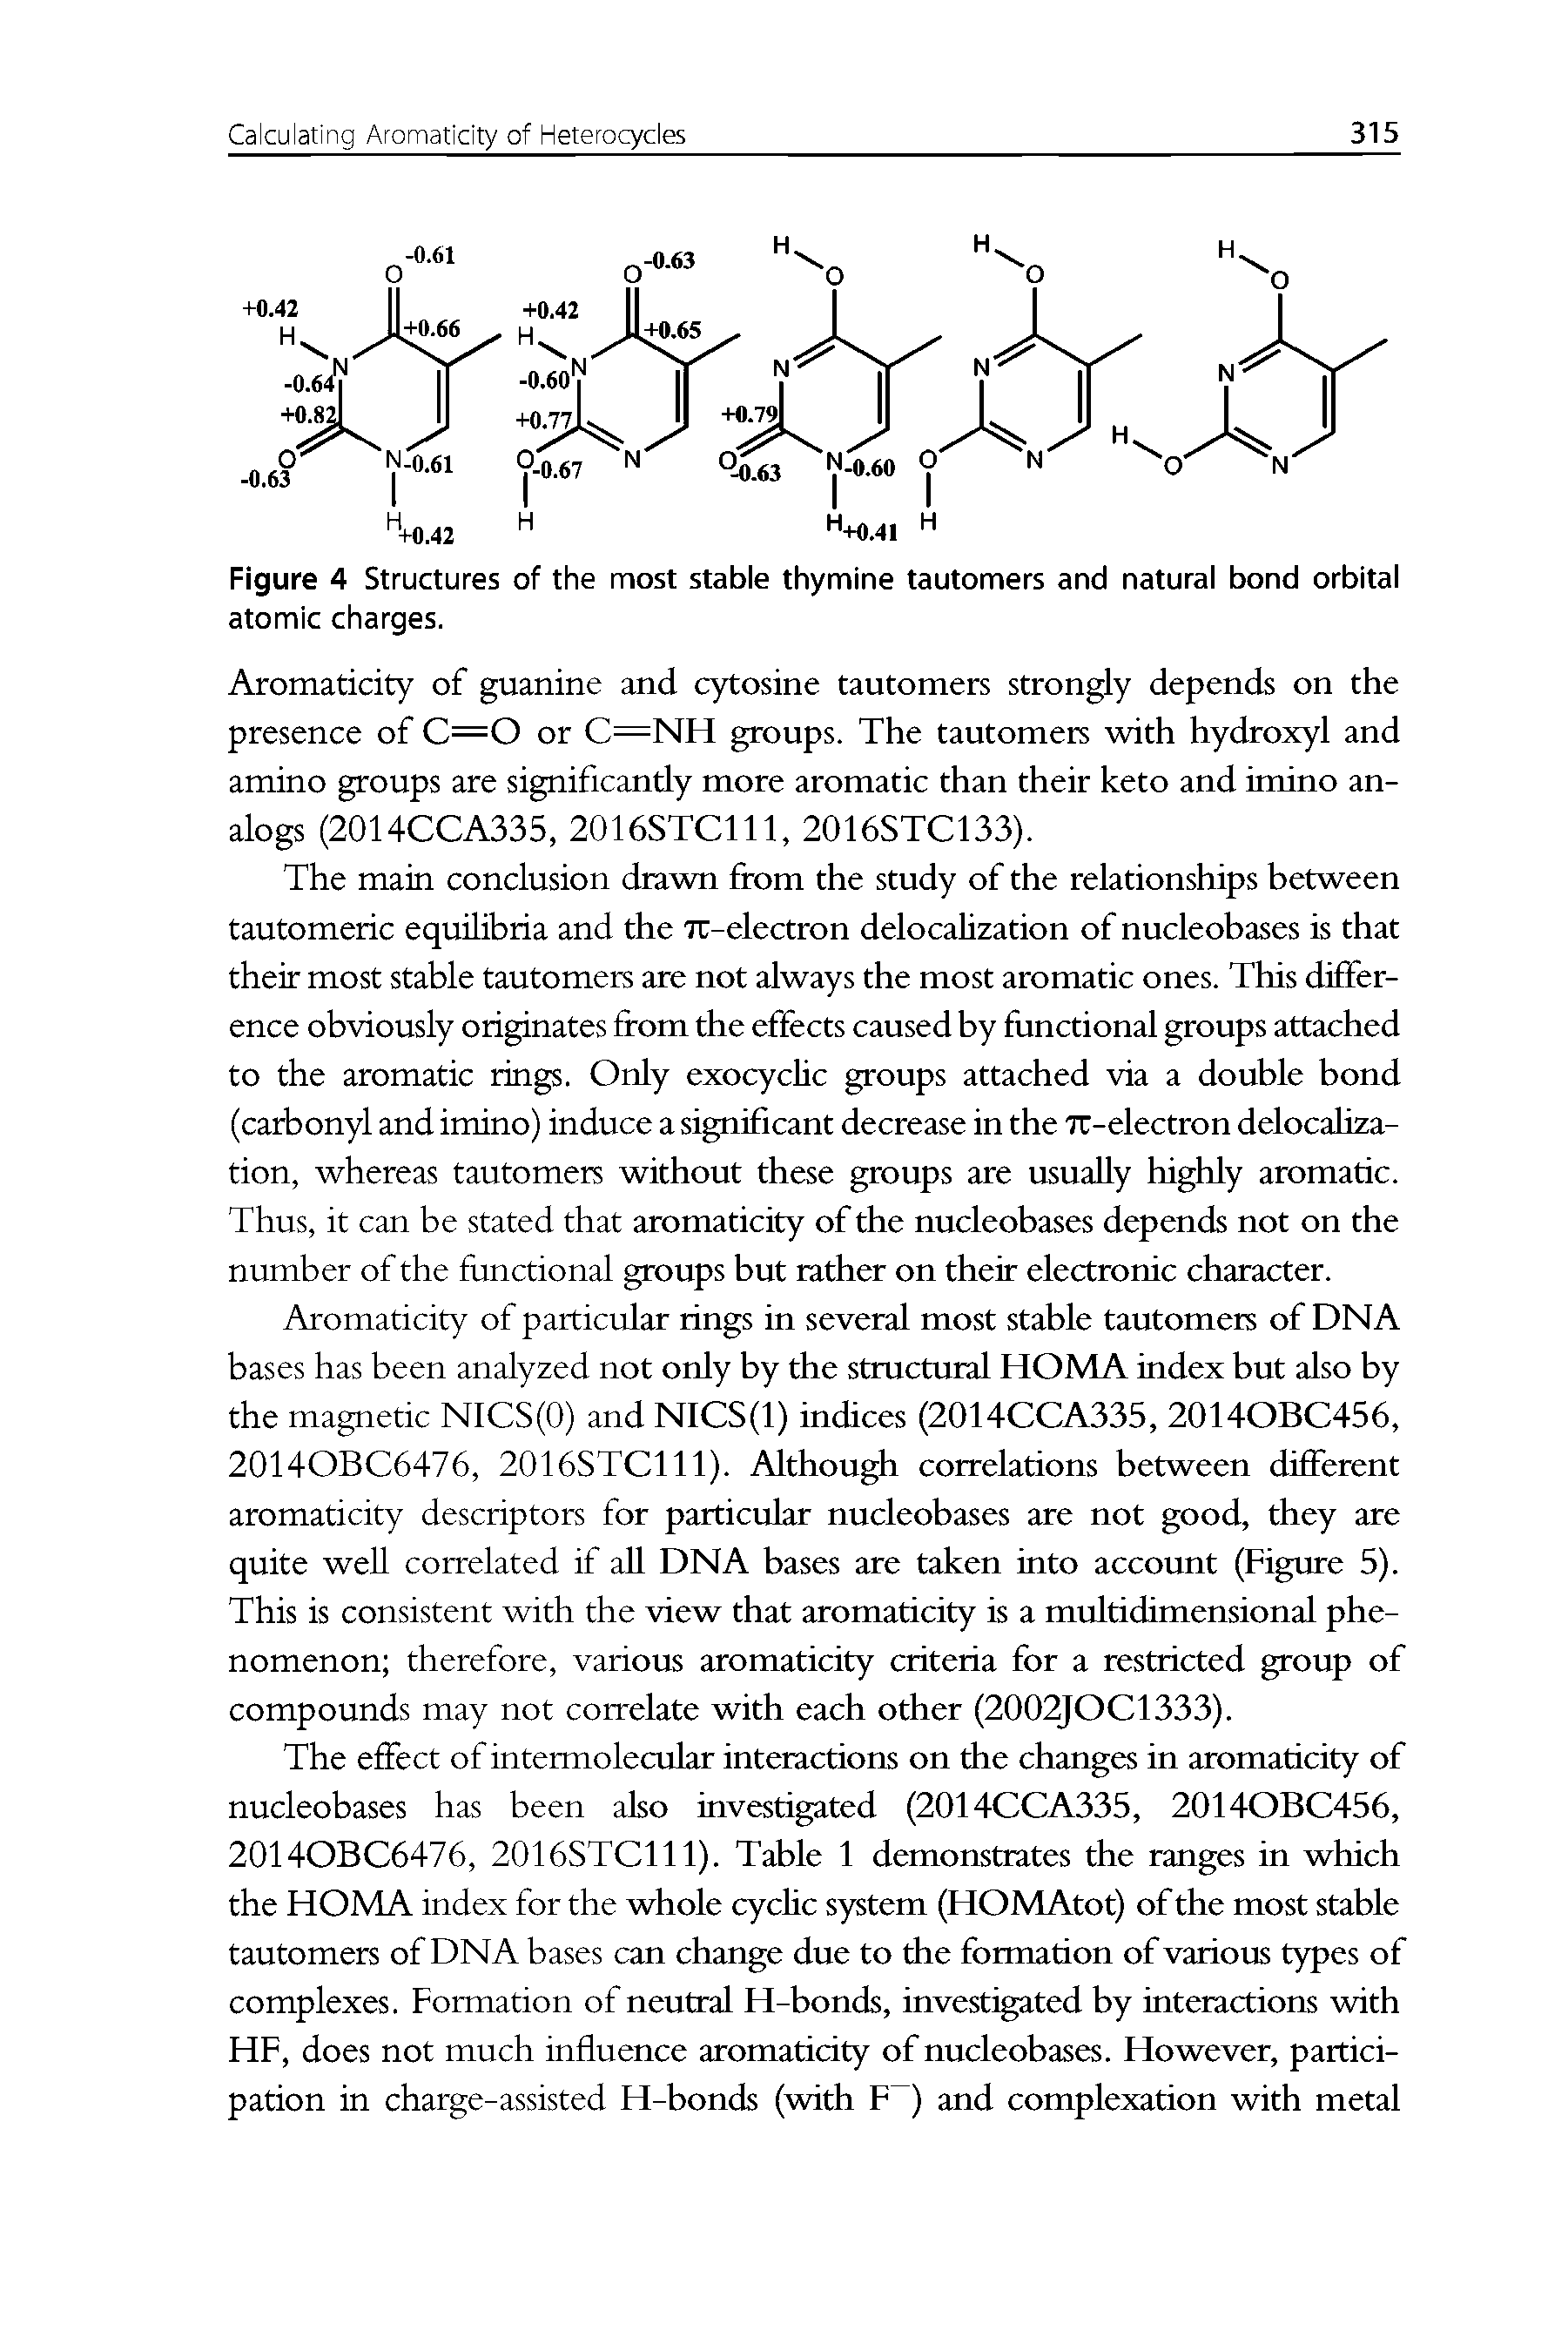 Figure 4 Structures of the most stable thymine tautomers and natural bond orbital atomic charges.